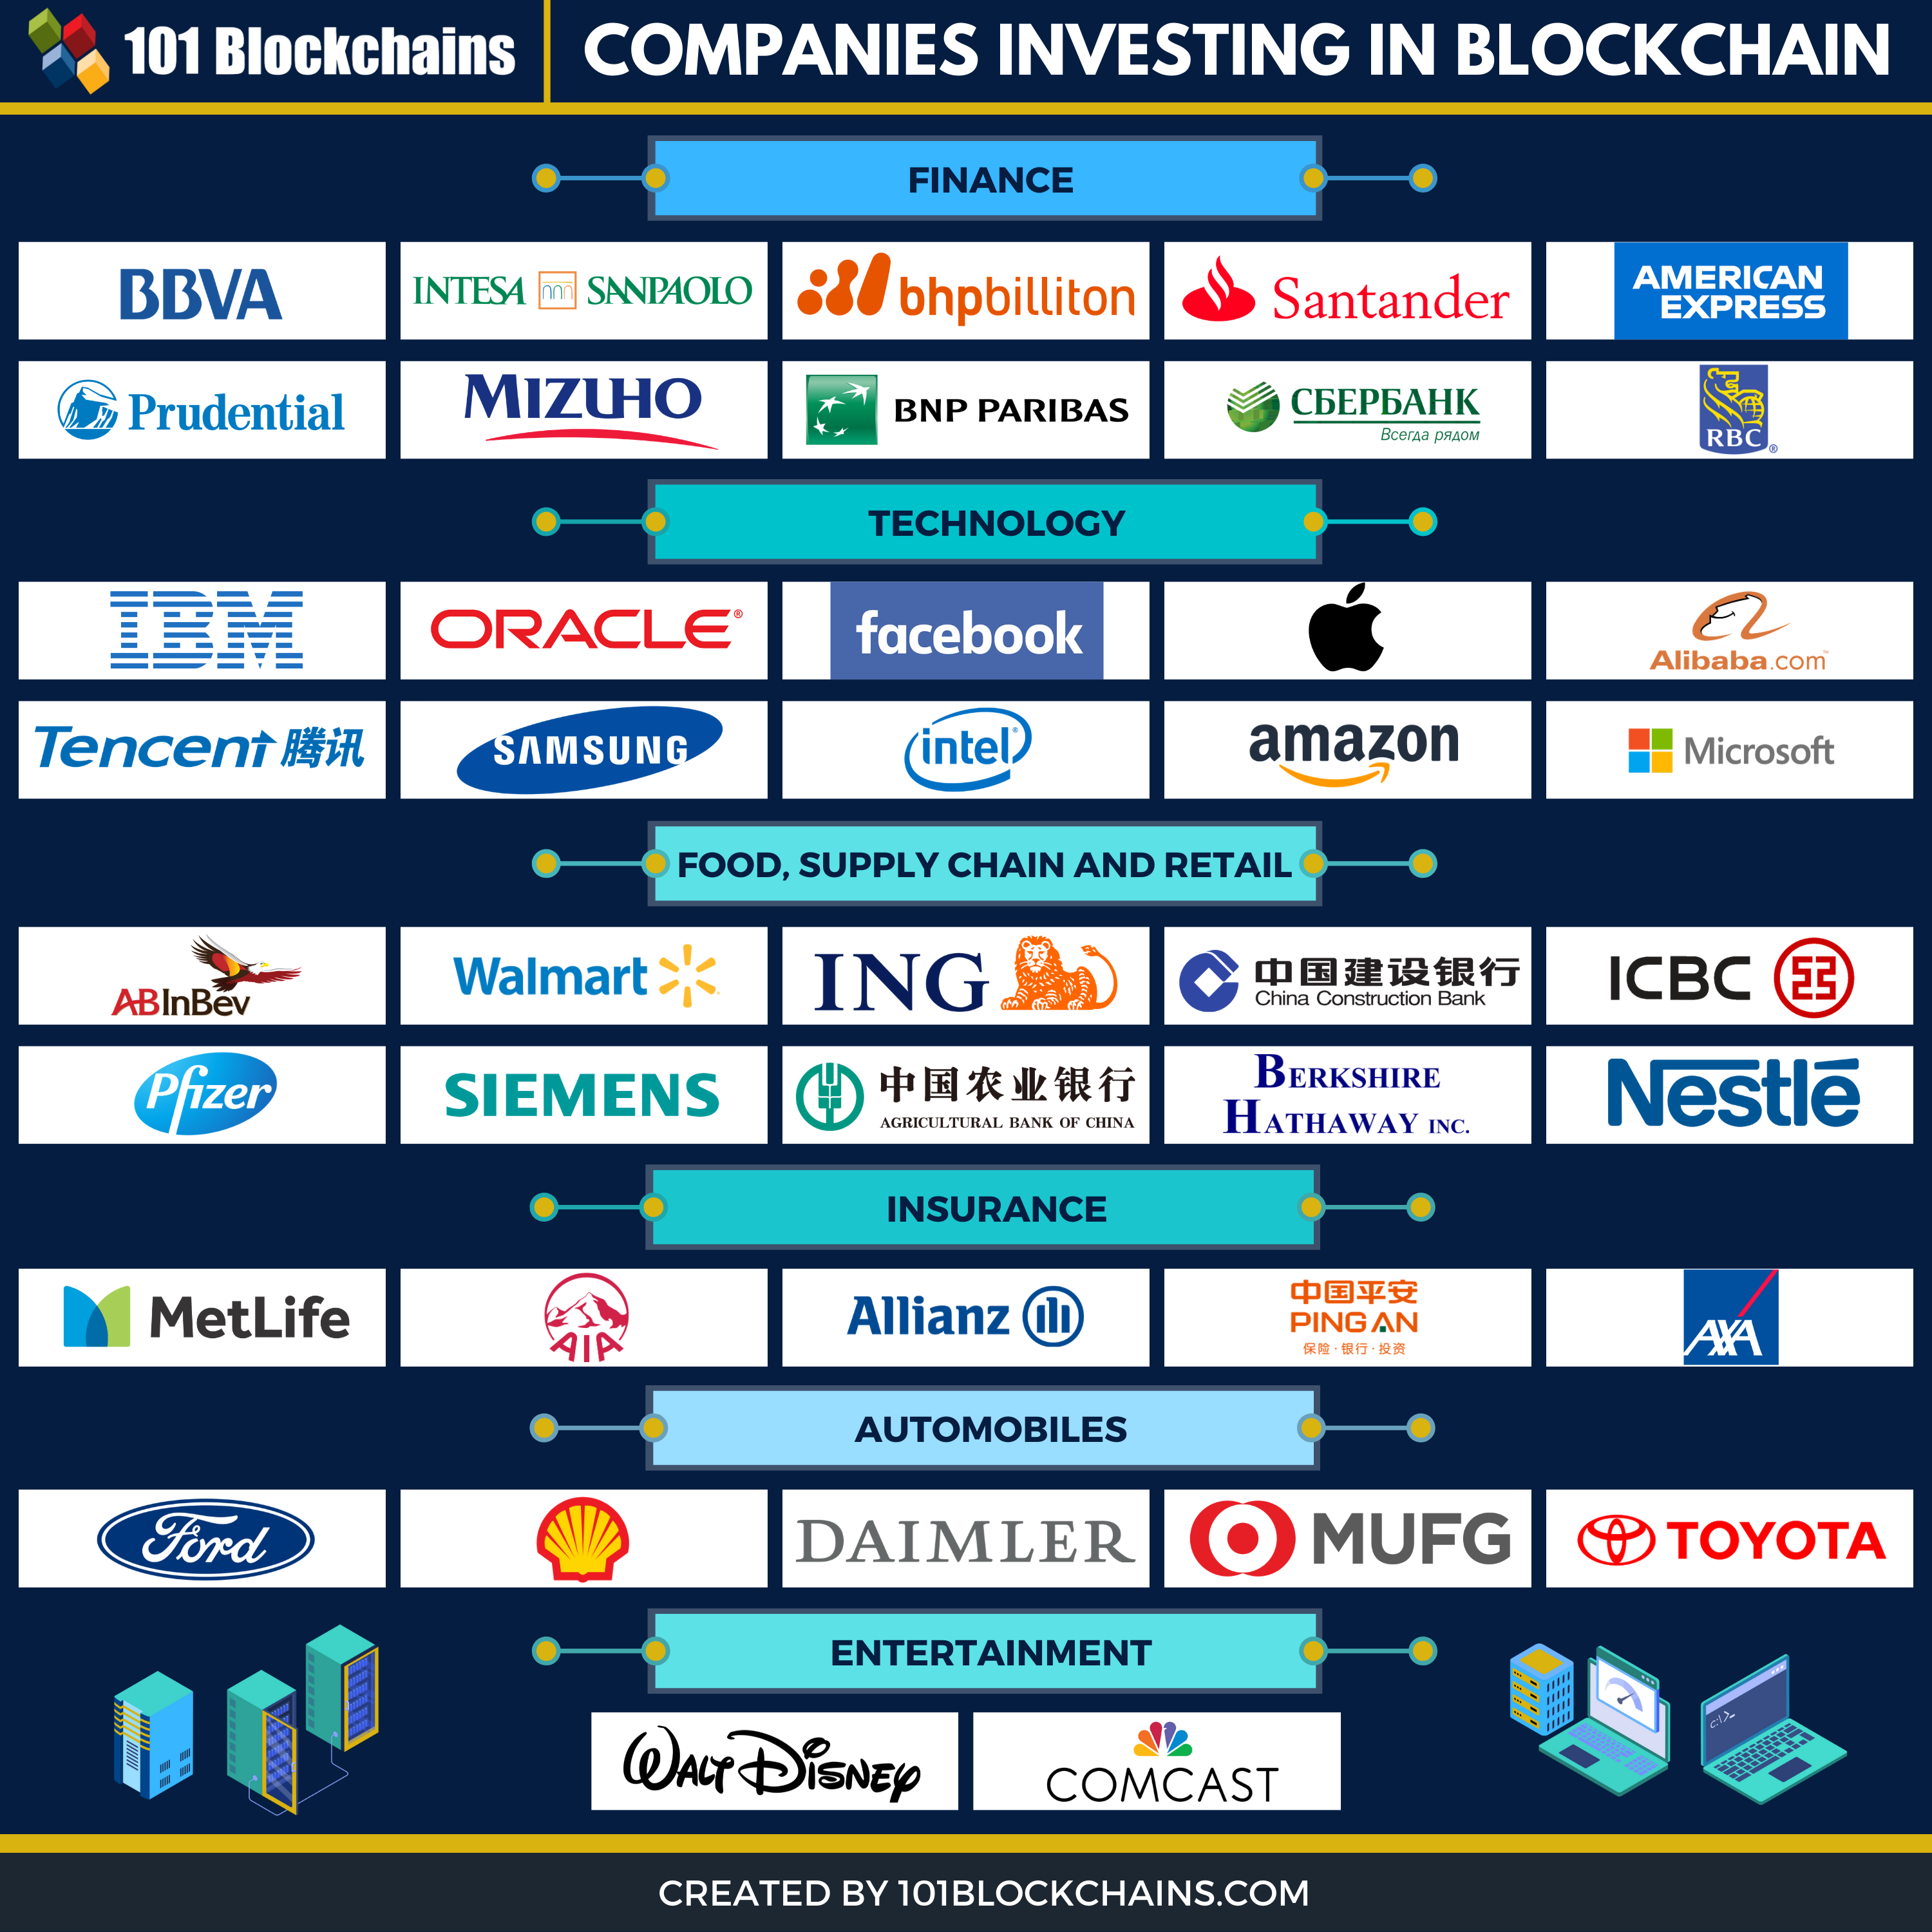 Corporations investing in blockchain finding entry points in crypto